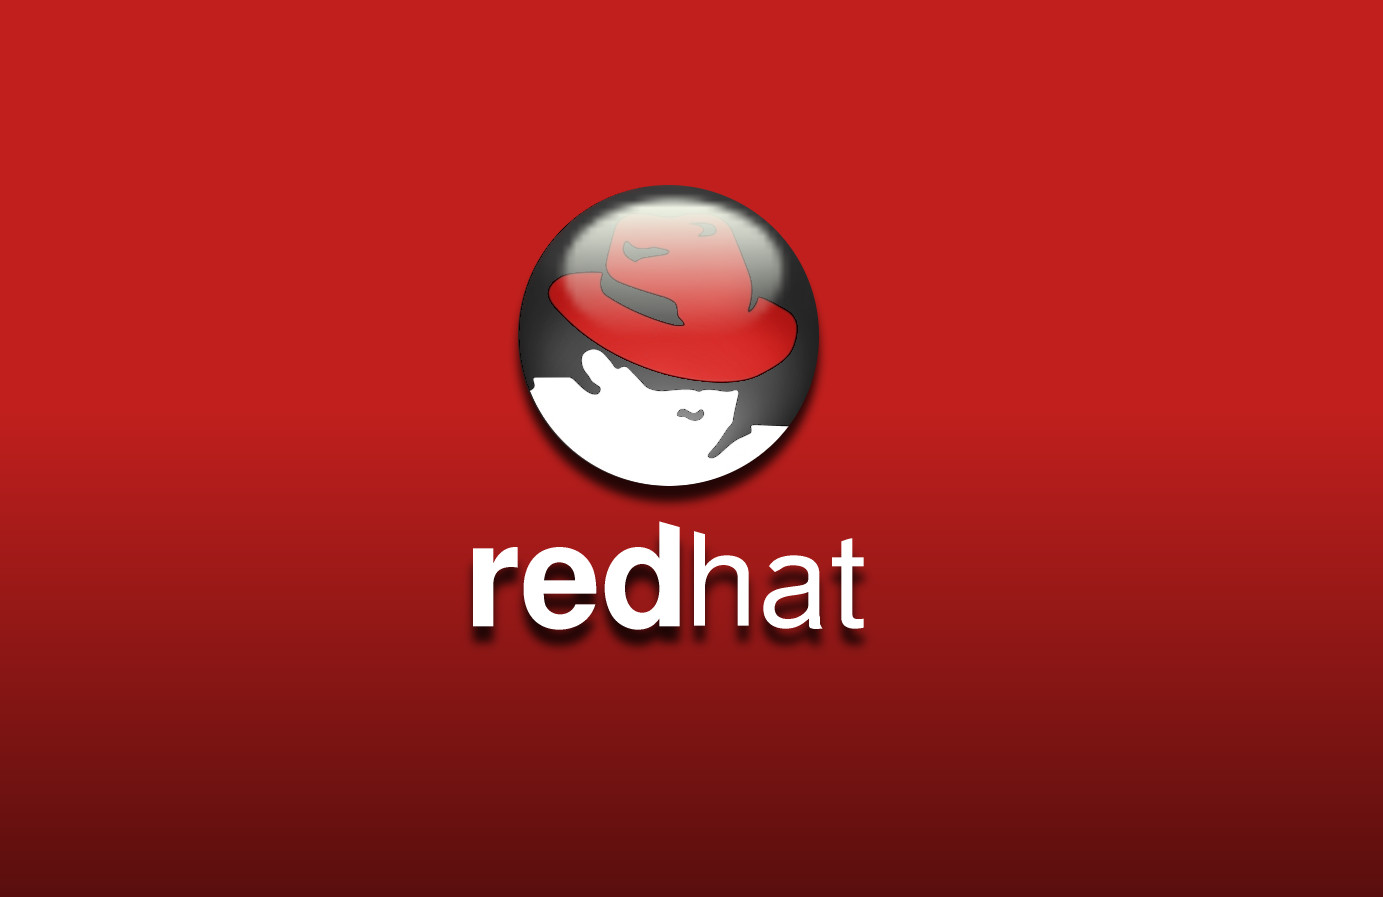 Red hat 7. Red hat. Red hat оперативка. Red hat 4. Дистрибутив Red hat.